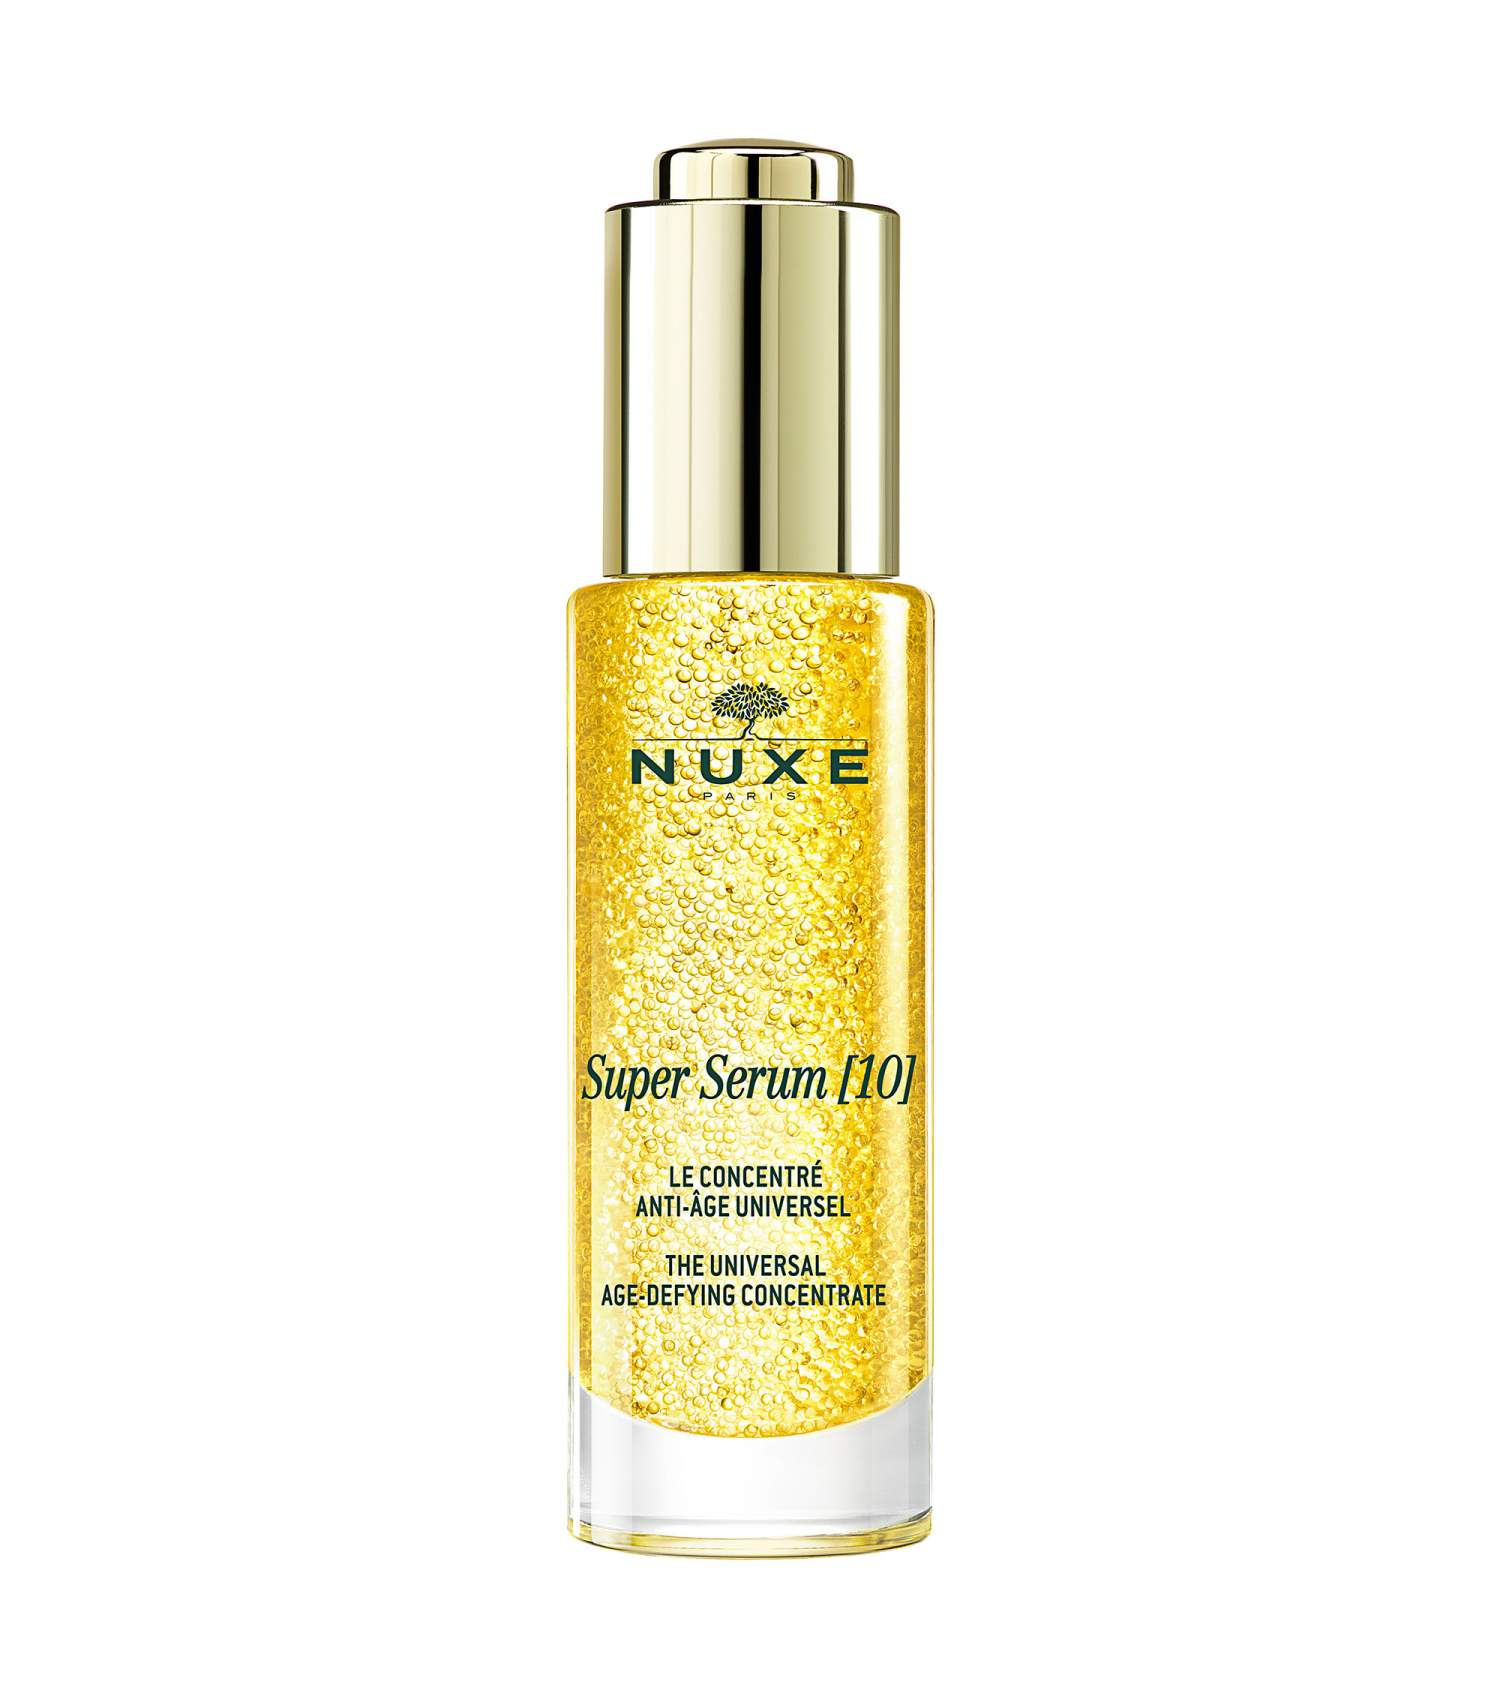 NUXE Super Serum [10] - The universal anti-ageing concentrate